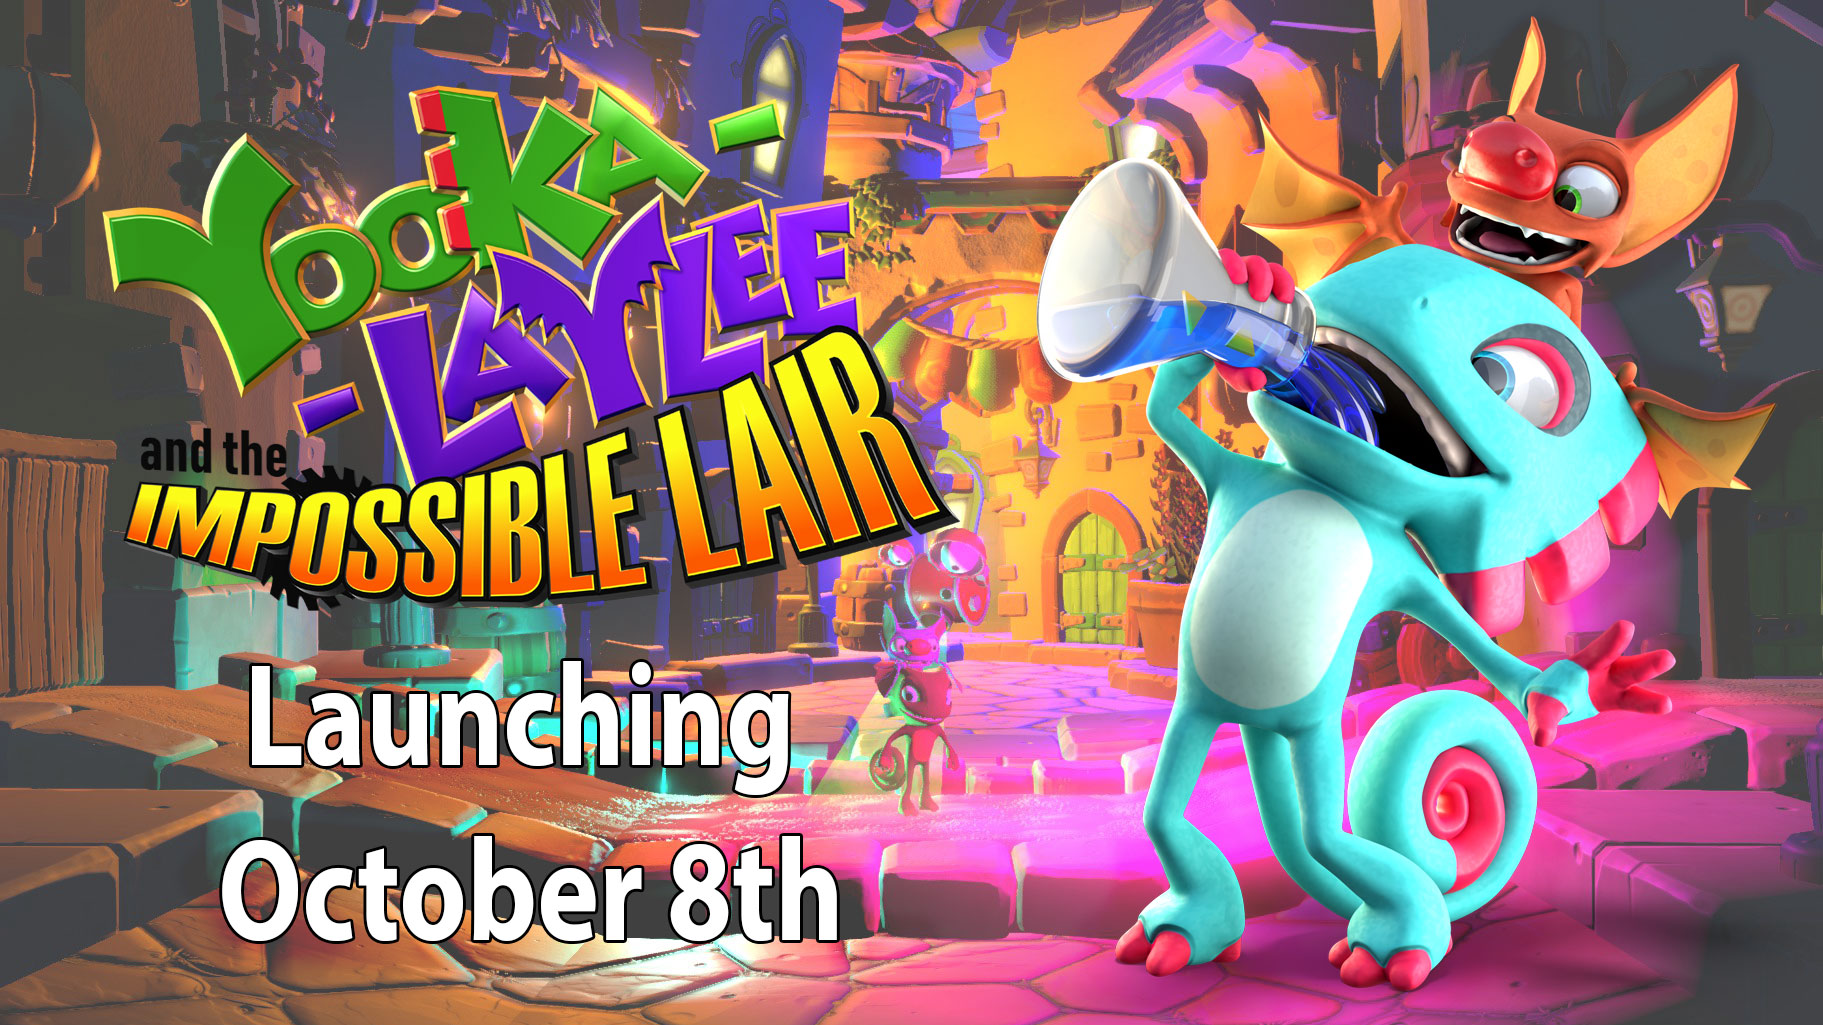 Yooka-Laylee and the - Impossible Digital The Release Spirit LTD Of Date Independent Announcement! Team17 Games – - Lair